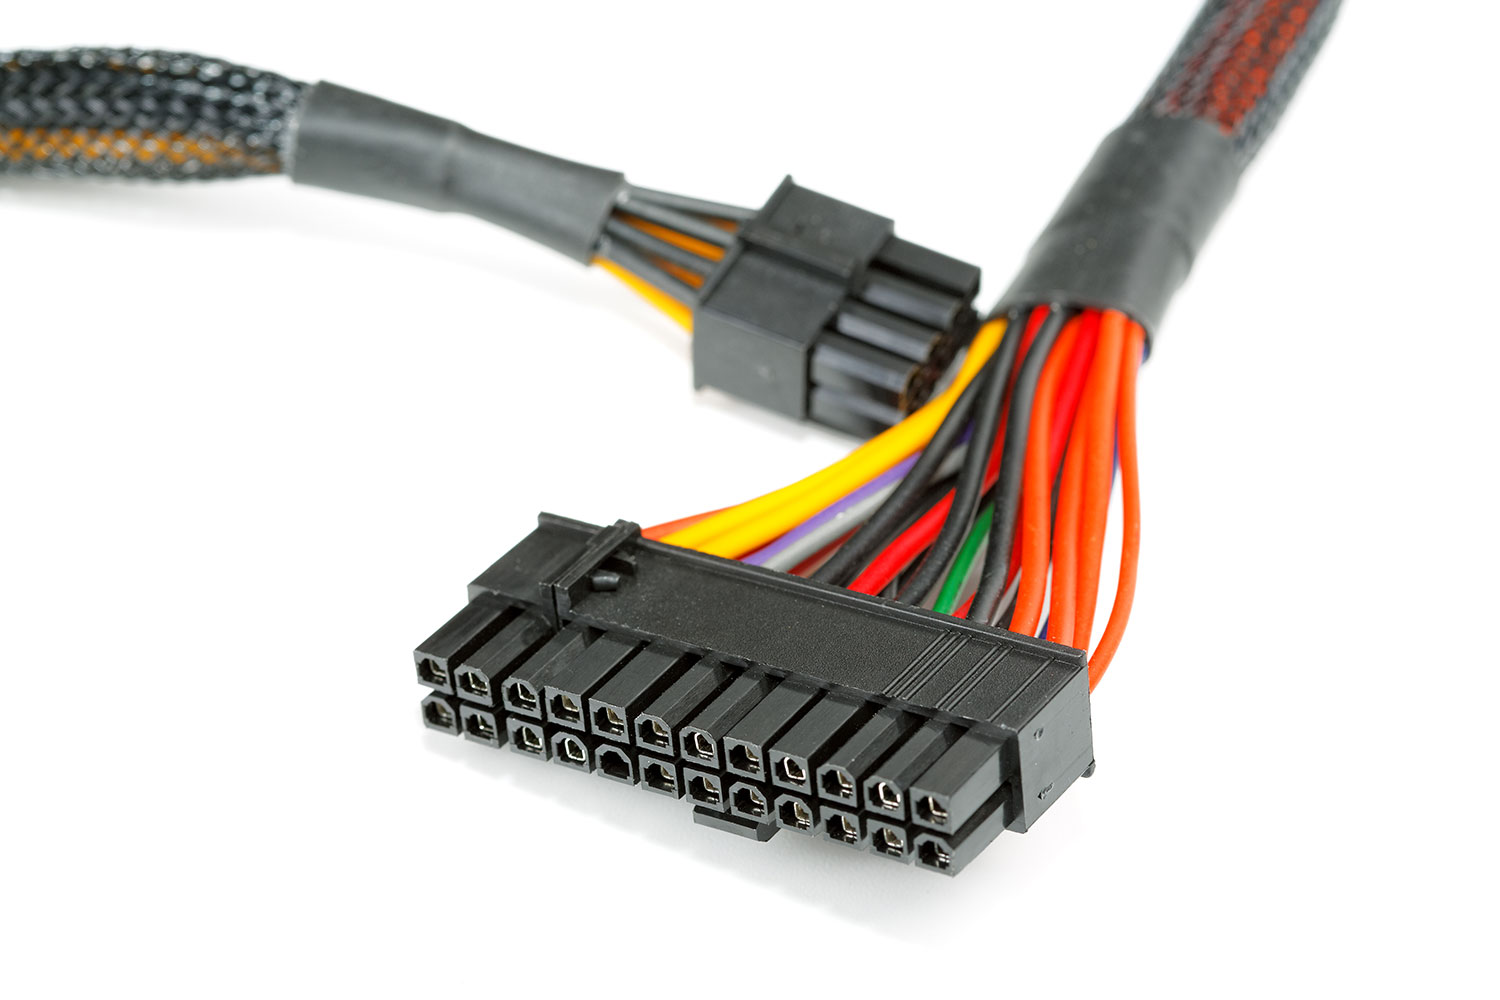 Connecting wires to a computer on a white background, part of a wiring harness traceability program